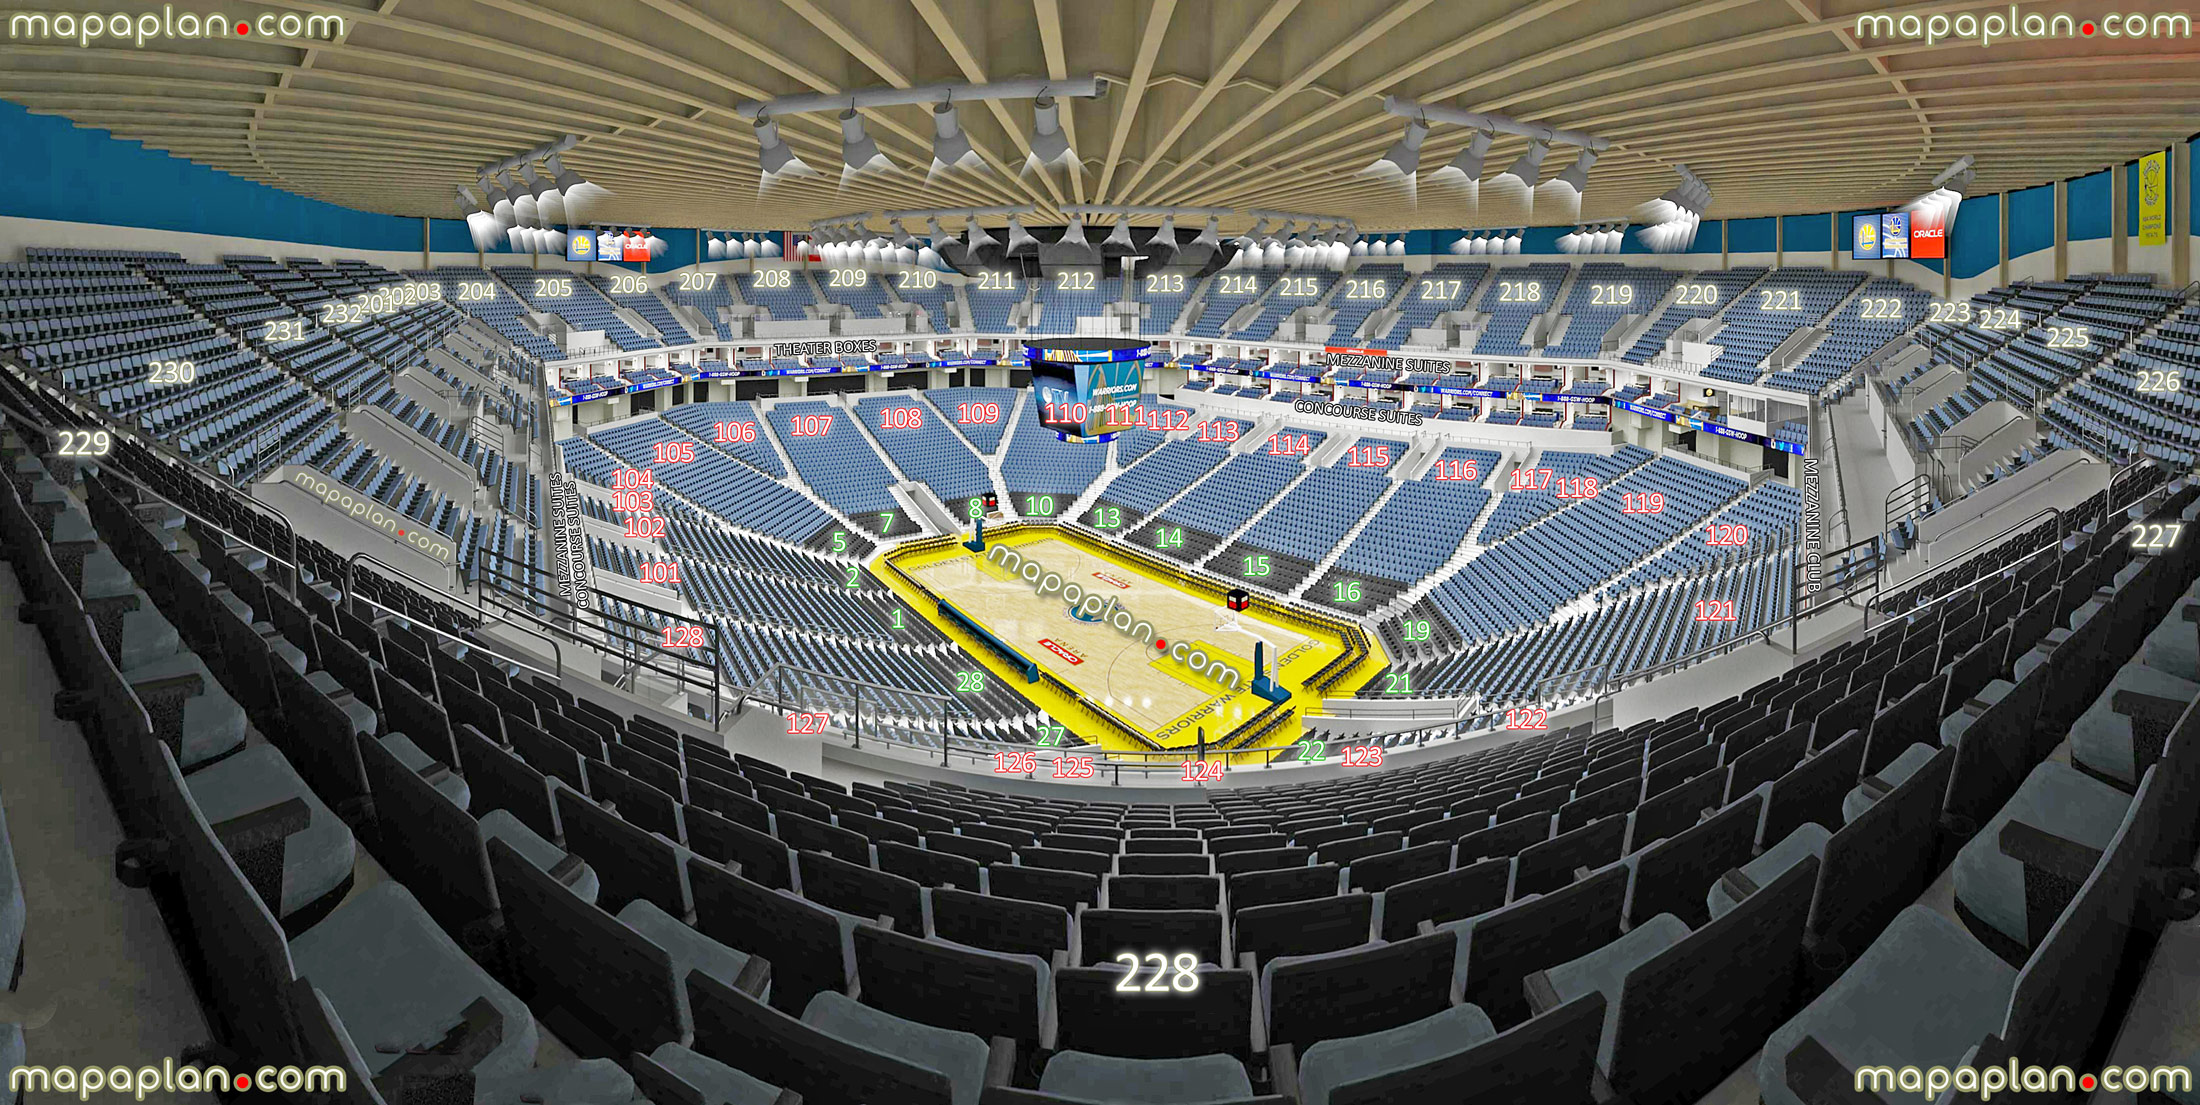 Oracle Arena - View from Section 228 - Row 17 - Seat 16 ...